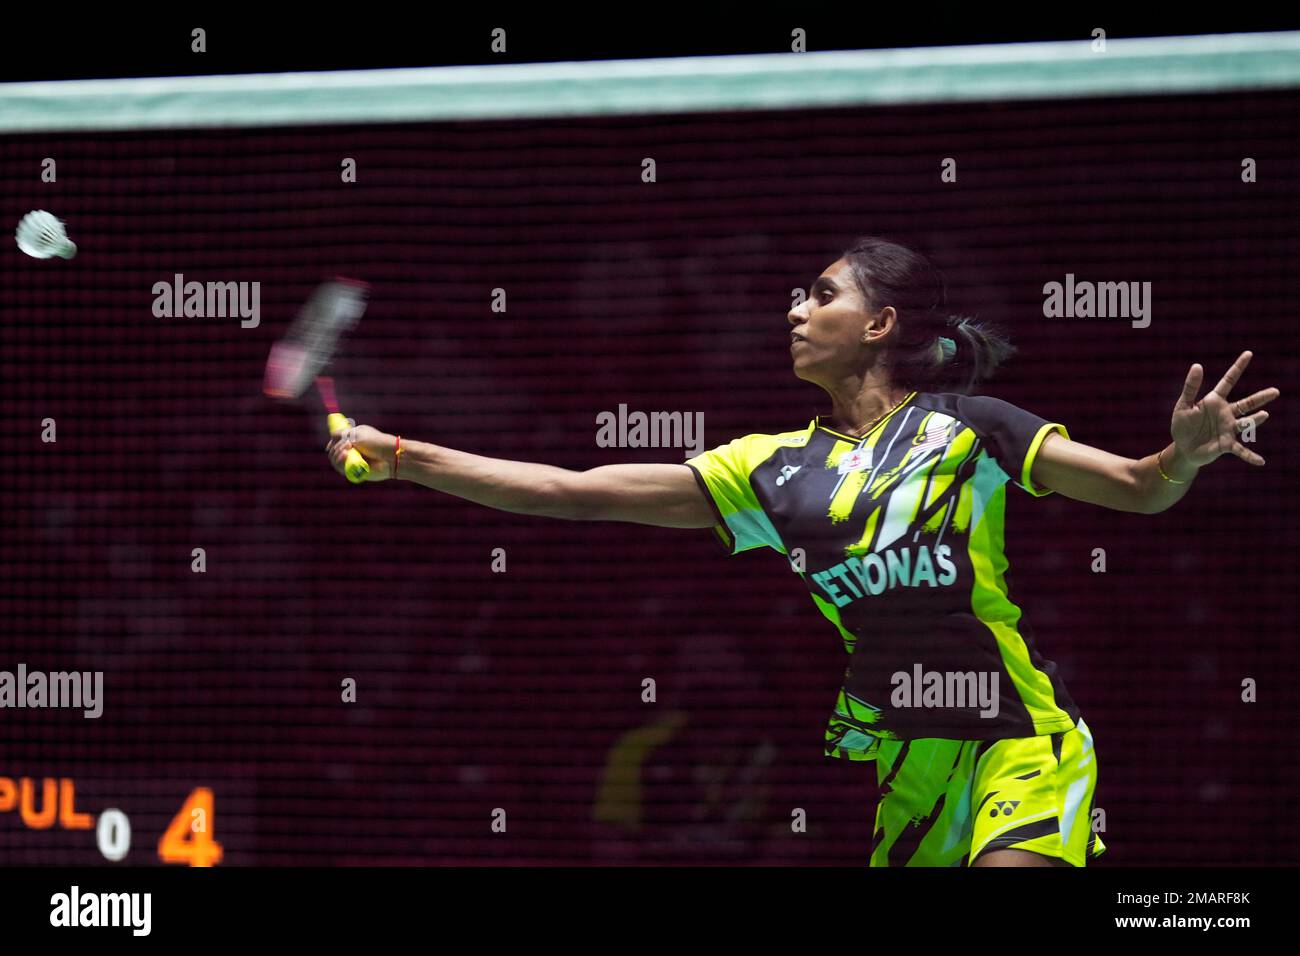 Thinaah Muralitharan of Malaysia, with Tan Pearly, plays a return during a badminton game of the women's doubles against Treesa Jolly and Gayatri Gopichand Pullela of India in the BWF World Championships in Tokyo, Wednesday, Aug. 24, 2022. (AP Photo/Hiro Komae) Stock Photo